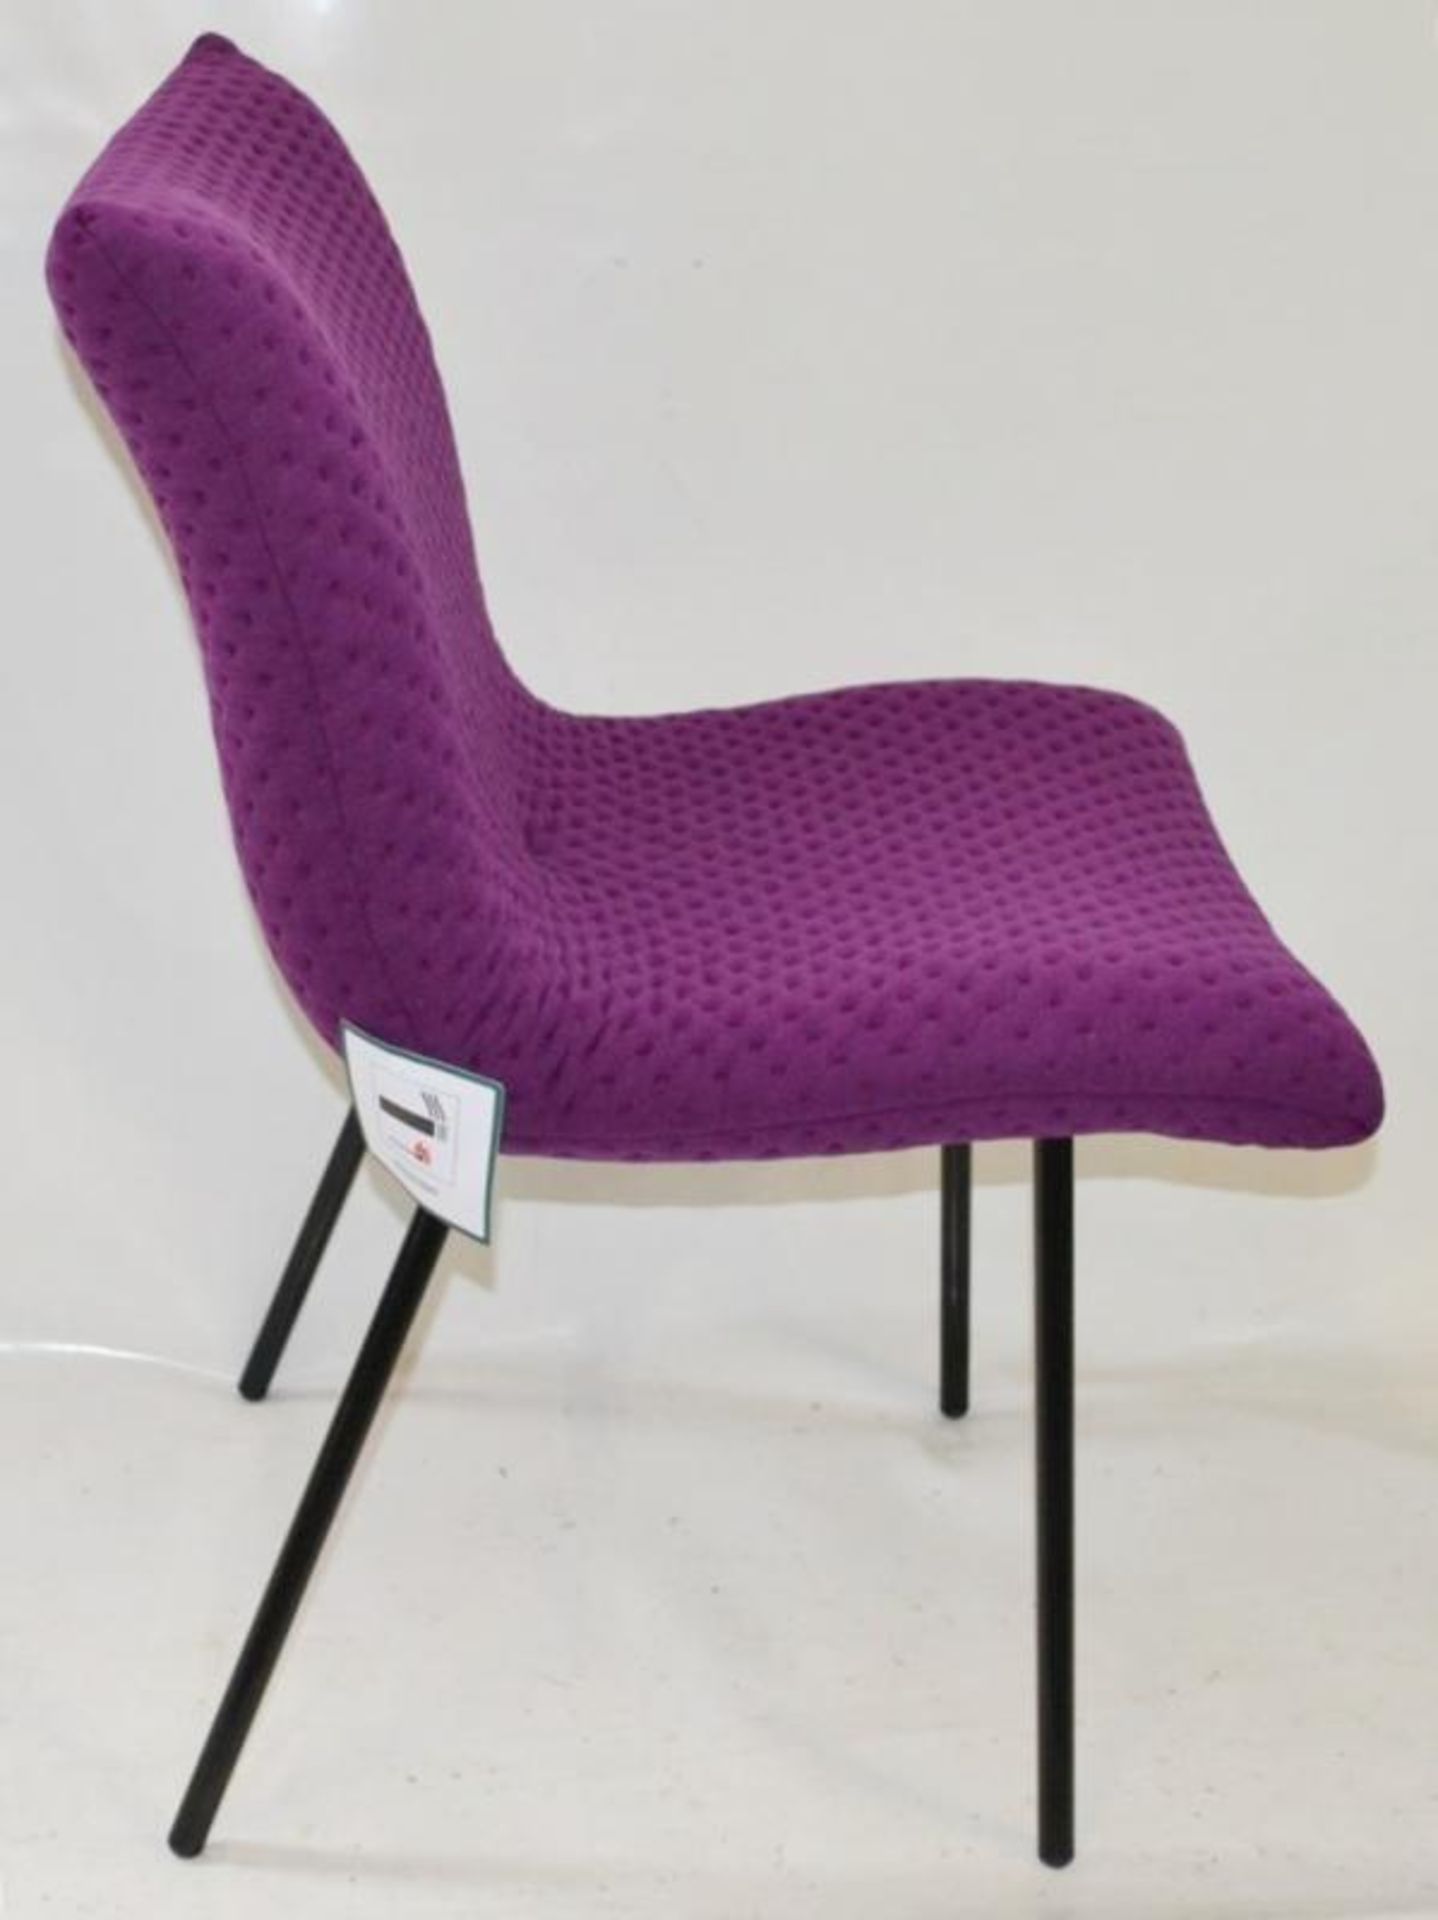 1 x Ligne Roset 'Calin' Chair - Features Bright Purple Upholsterey - Made In France - Ref: 6206608 P - Image 3 of 7